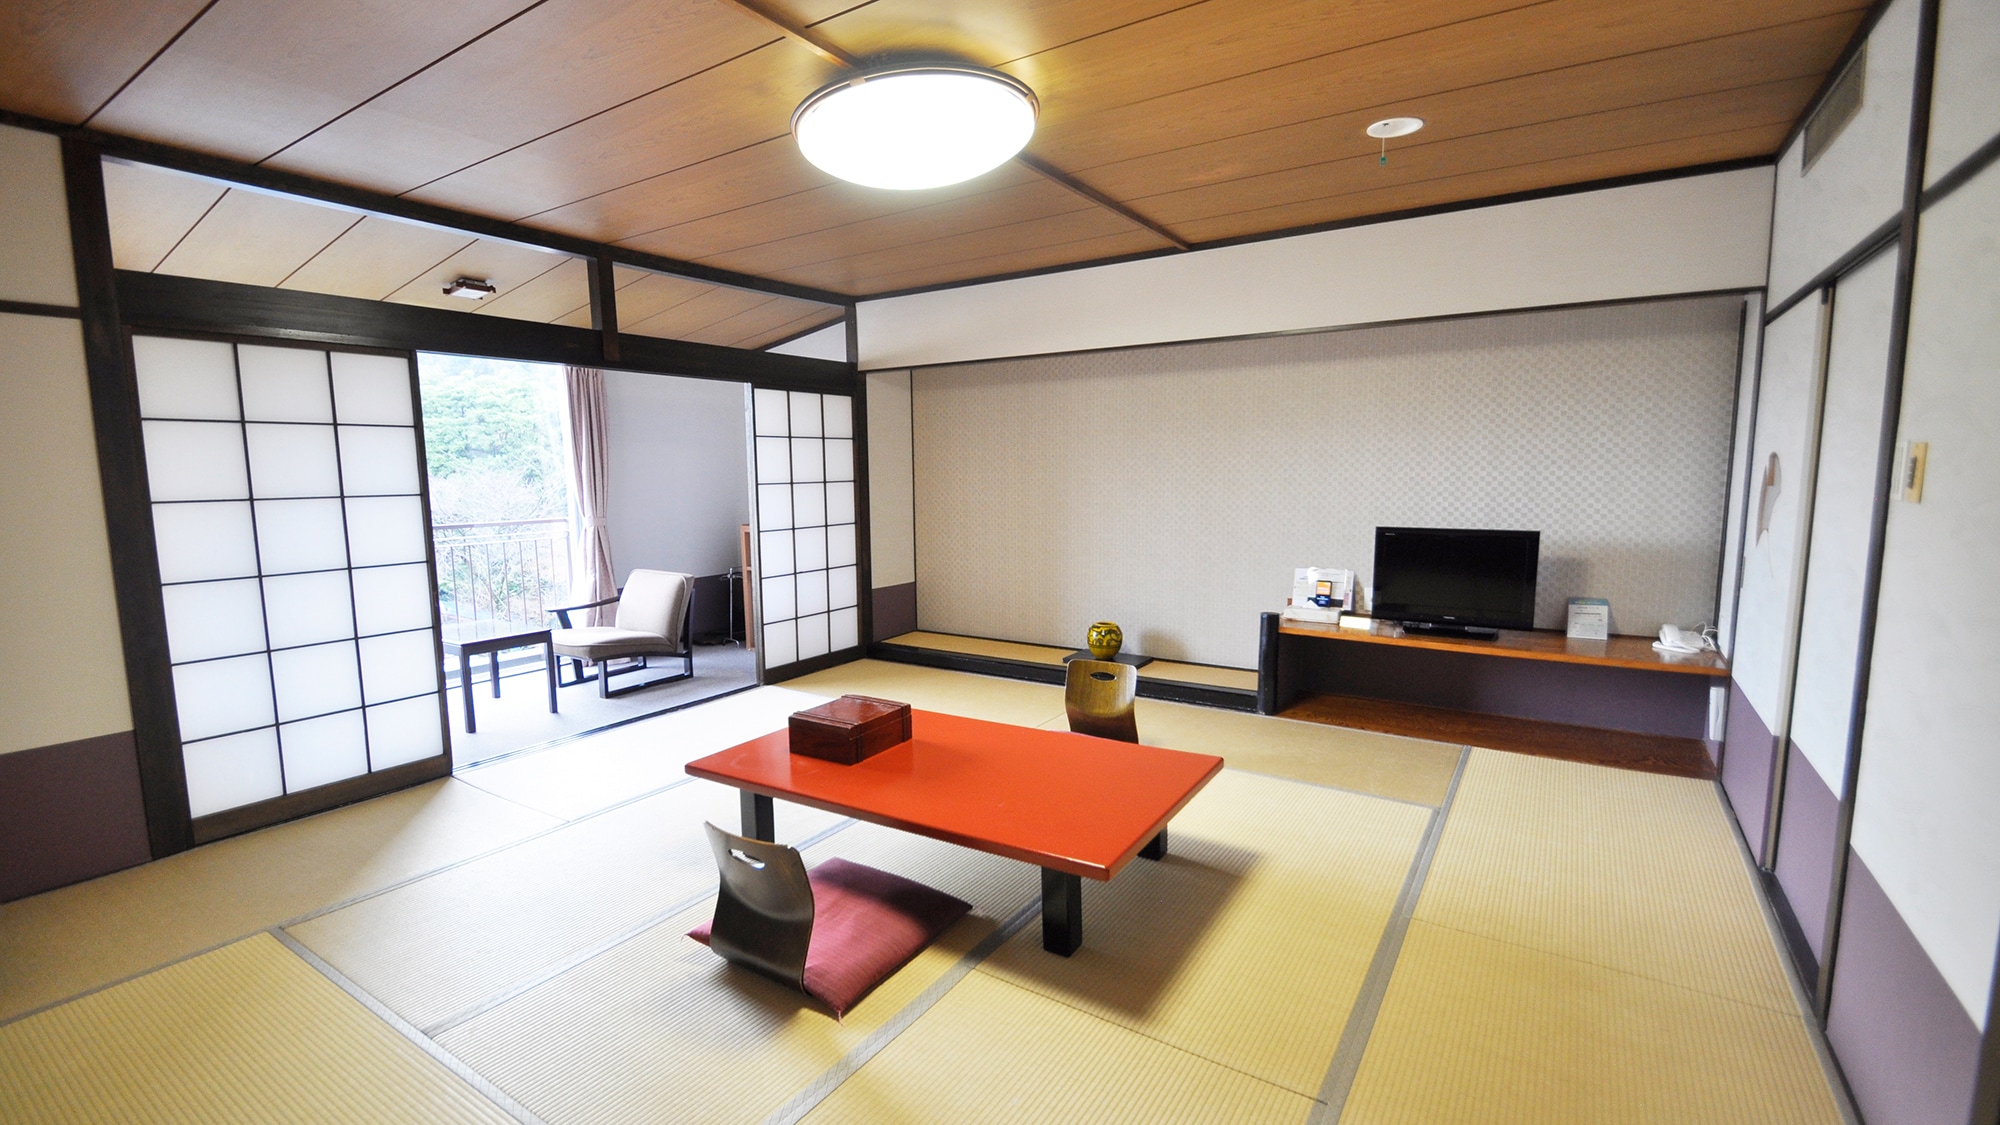 Spacious Japanese-style room "pure Japanese-style guest room" that can be accommodated by families with children Mori no Tate